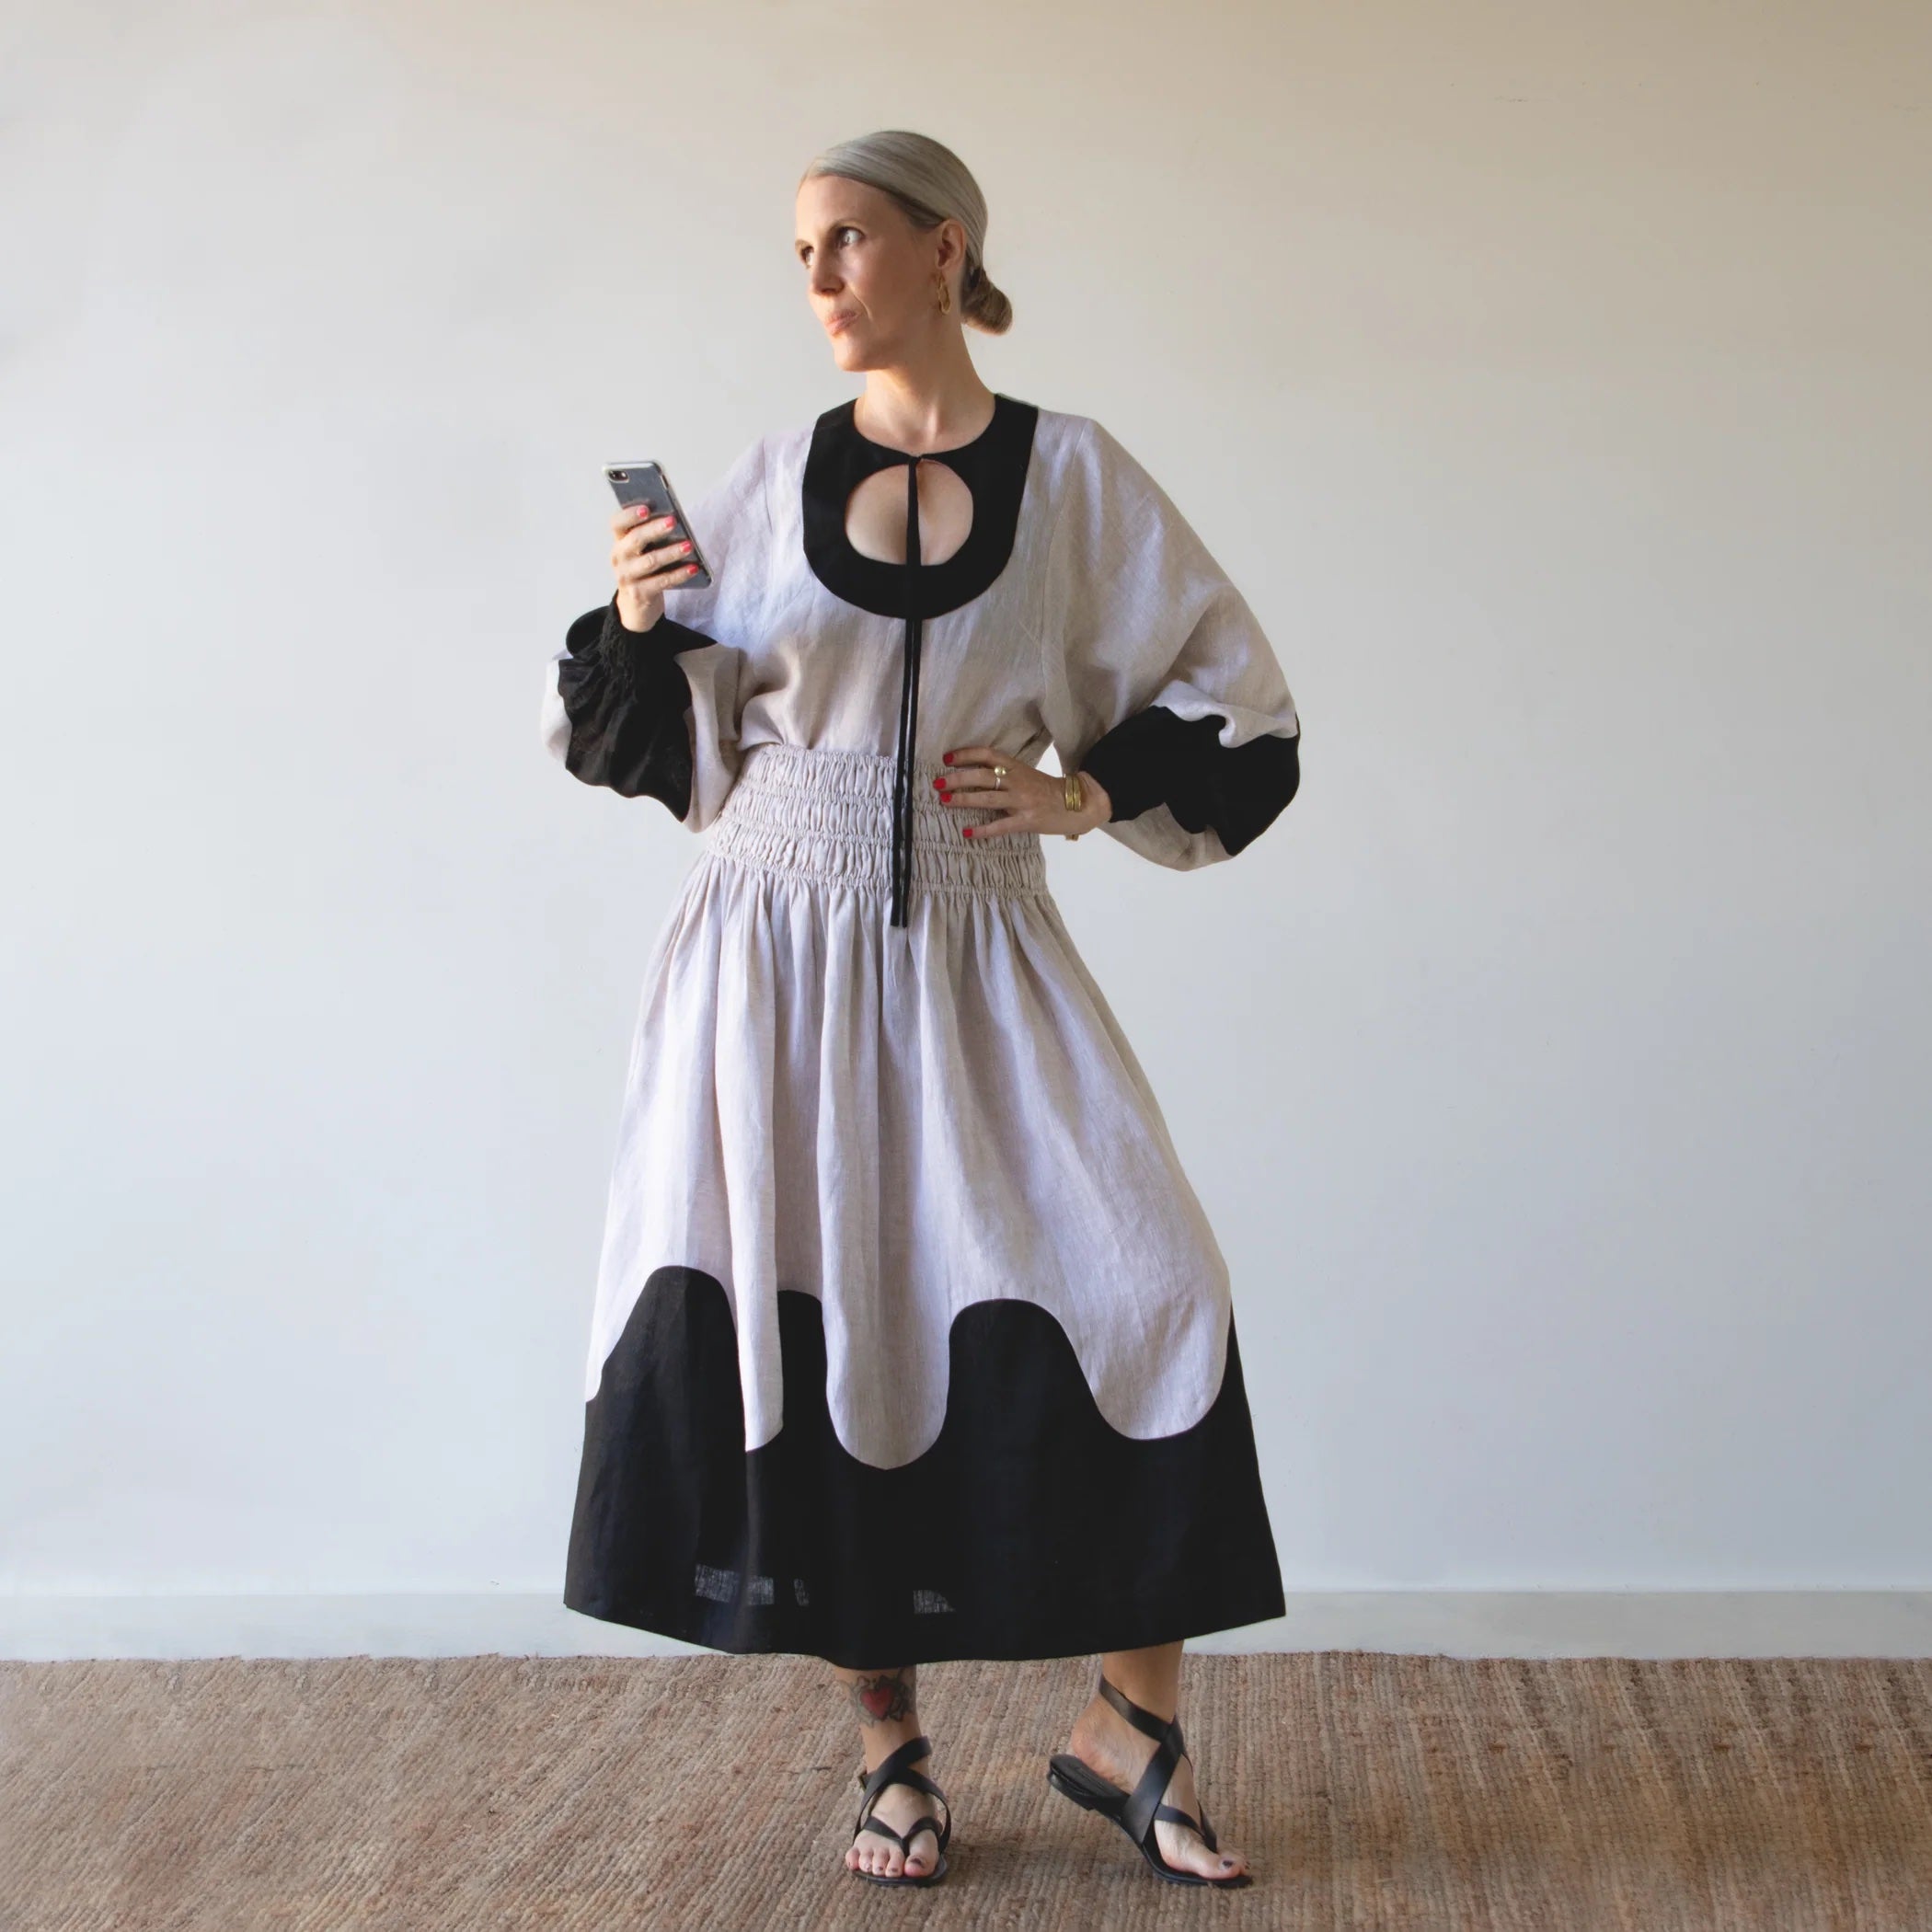 Woman wearing the Harmonic Set sewing pattern from Pattern Fantastique on The Fold Line. A top and skirt pattern made in linen or cotton fabrics, featuring a top with circular keyhole neckline with tie, balloon sleeve with deep armhole and faux-shirred cu